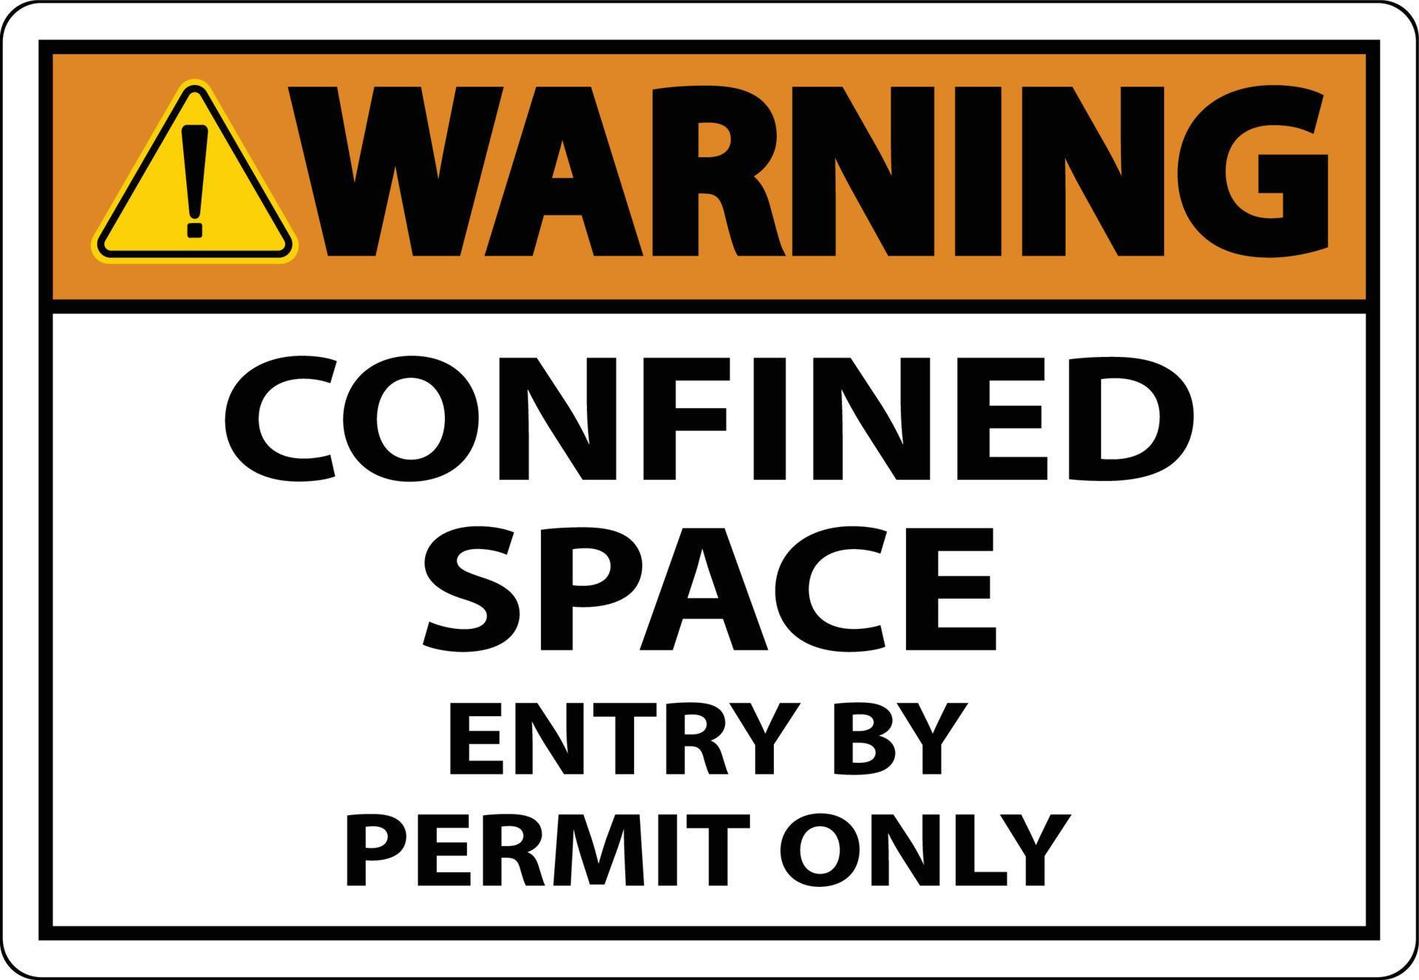 Warning Confined Space Entry By Permit Only Sign vector